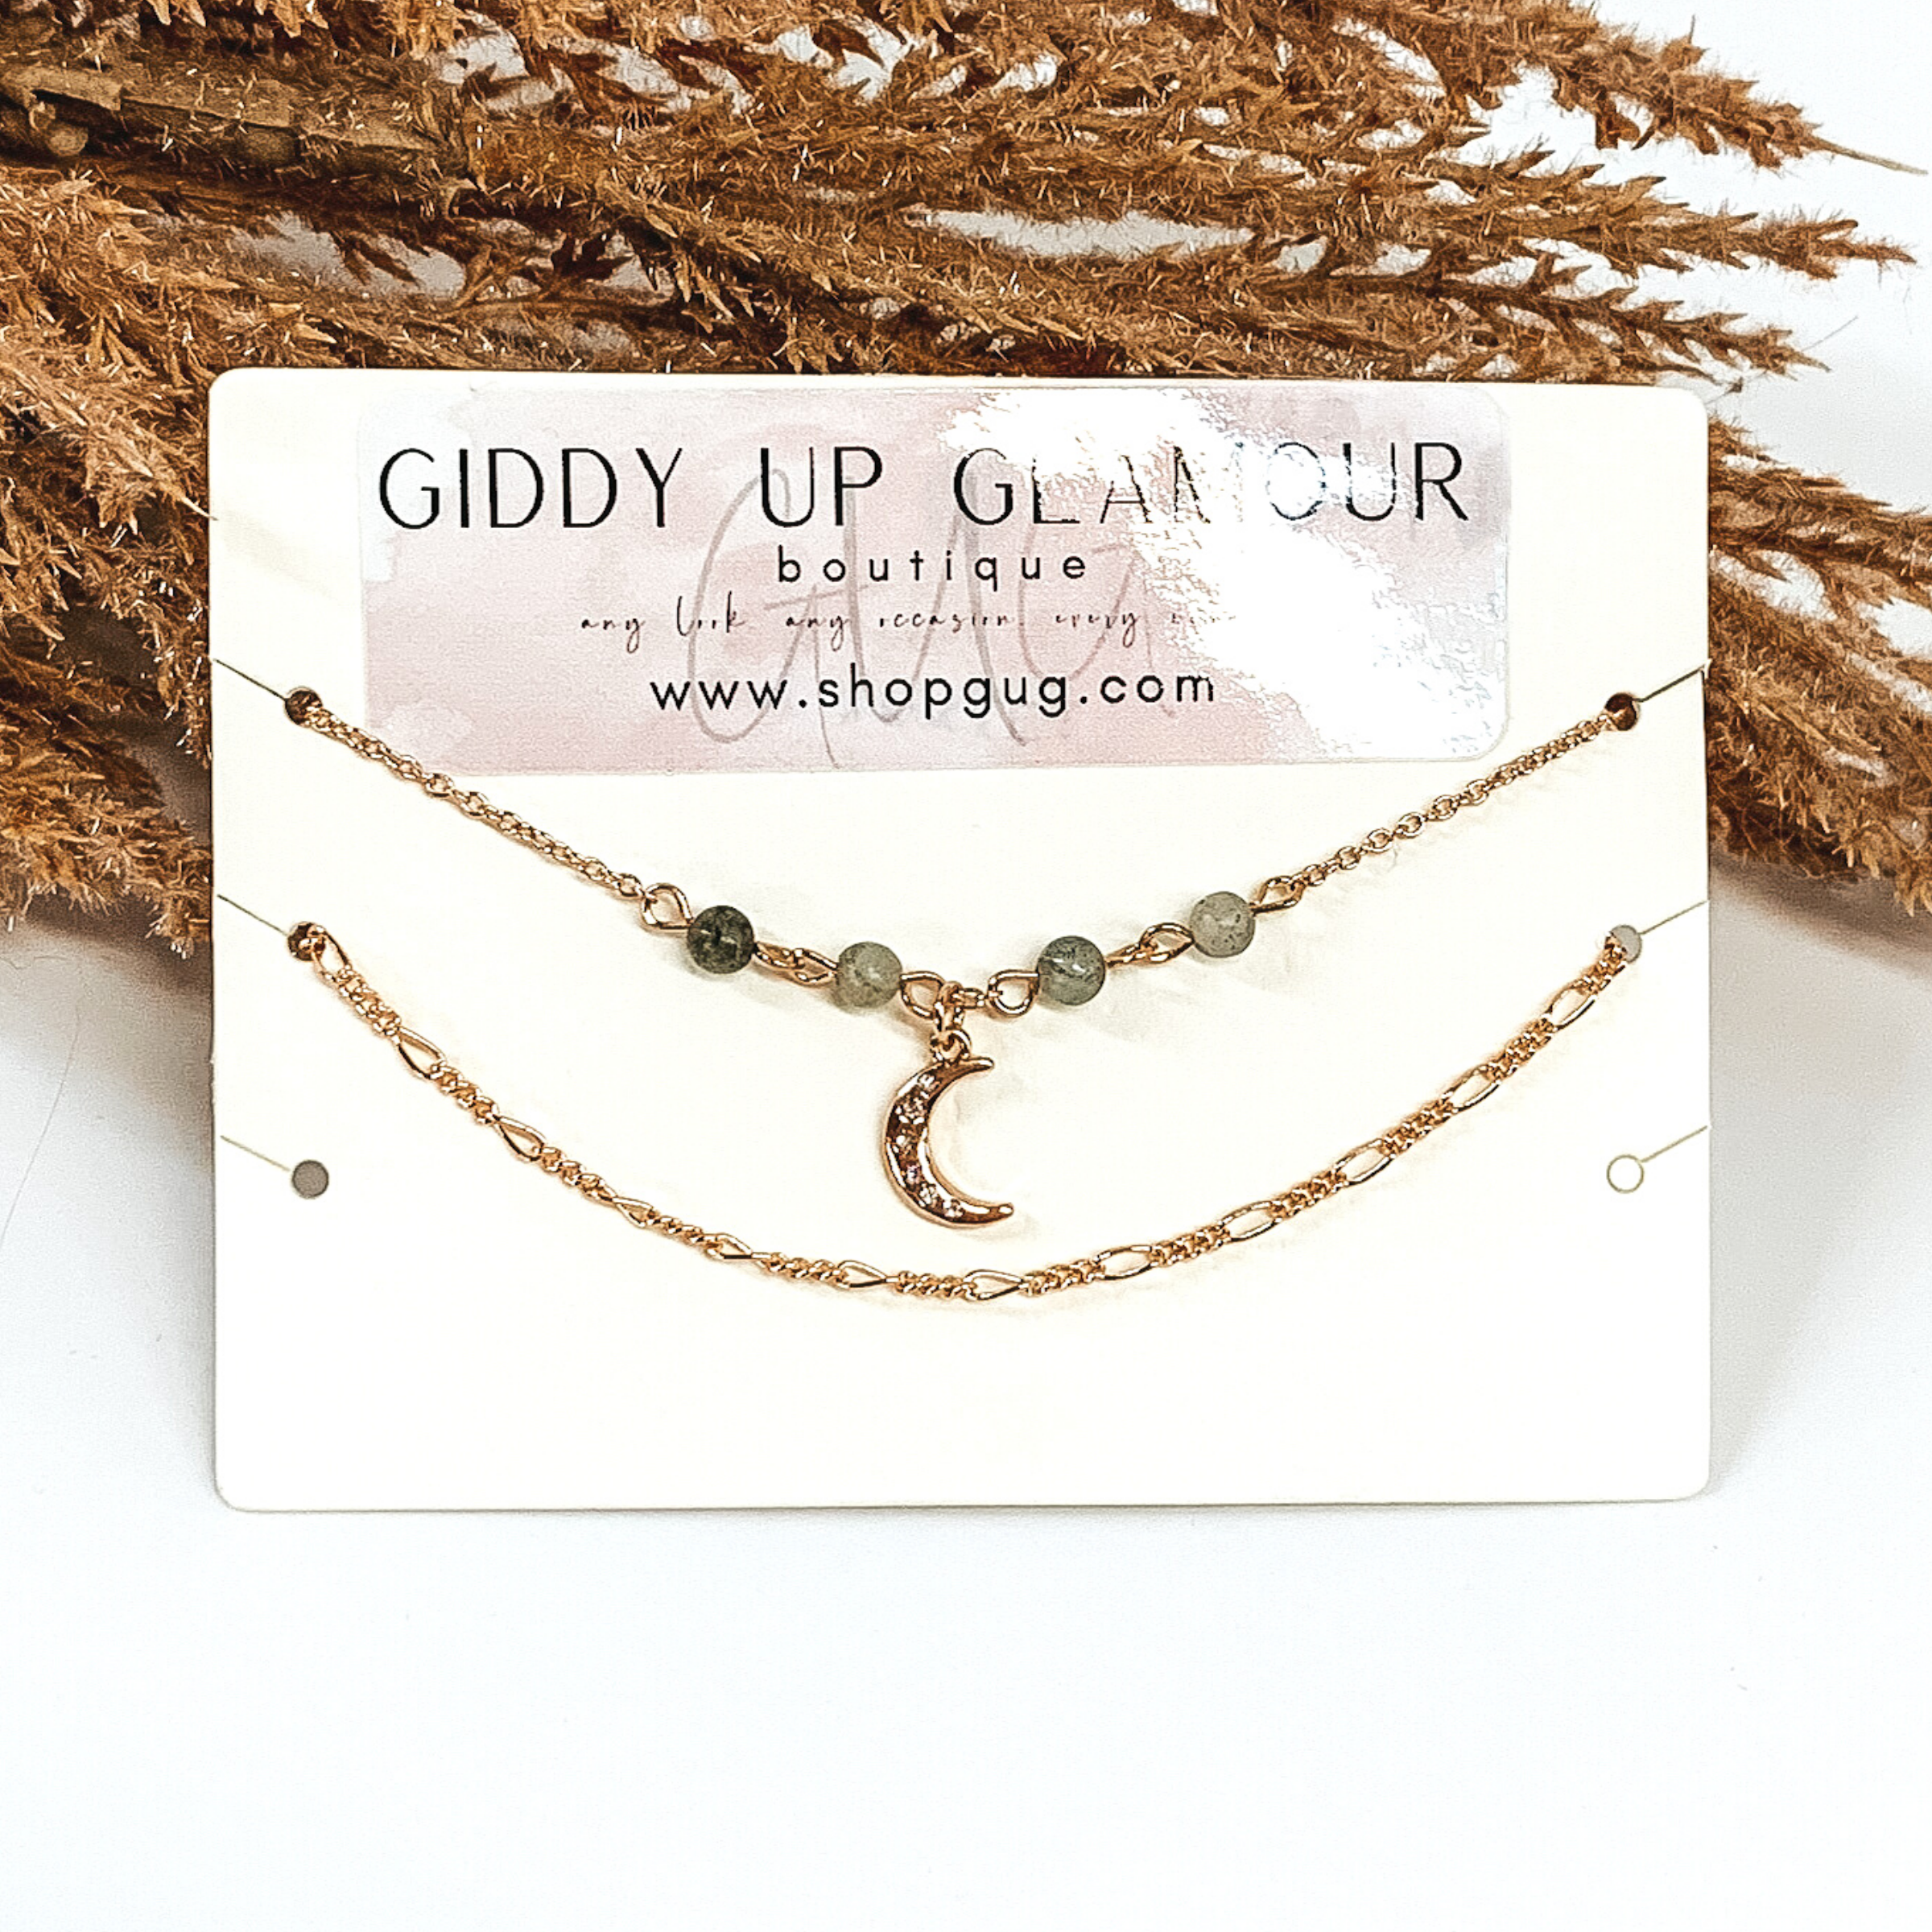 Two gold chain anklets. One was a plain anklet, while the second anklet has 4 grey beads with a gold moon charm in the center that has crystals on it. They are pictured on a white background that has brown floral. 